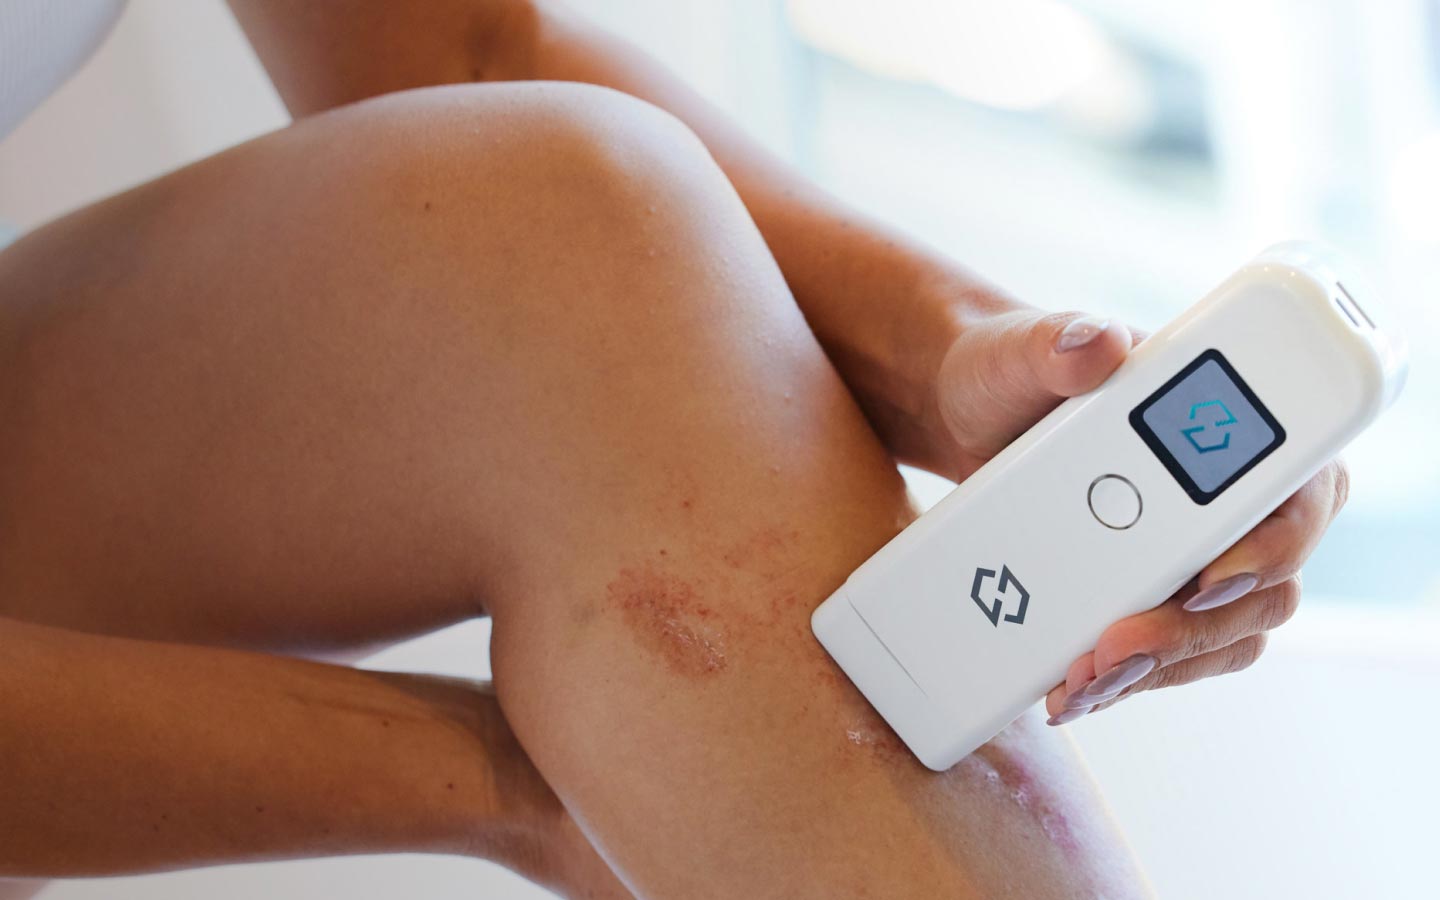 handheld UVB Smart Light Therapy device for people living with psoriasis, eczema/atopic dermatitis, & vitiligo